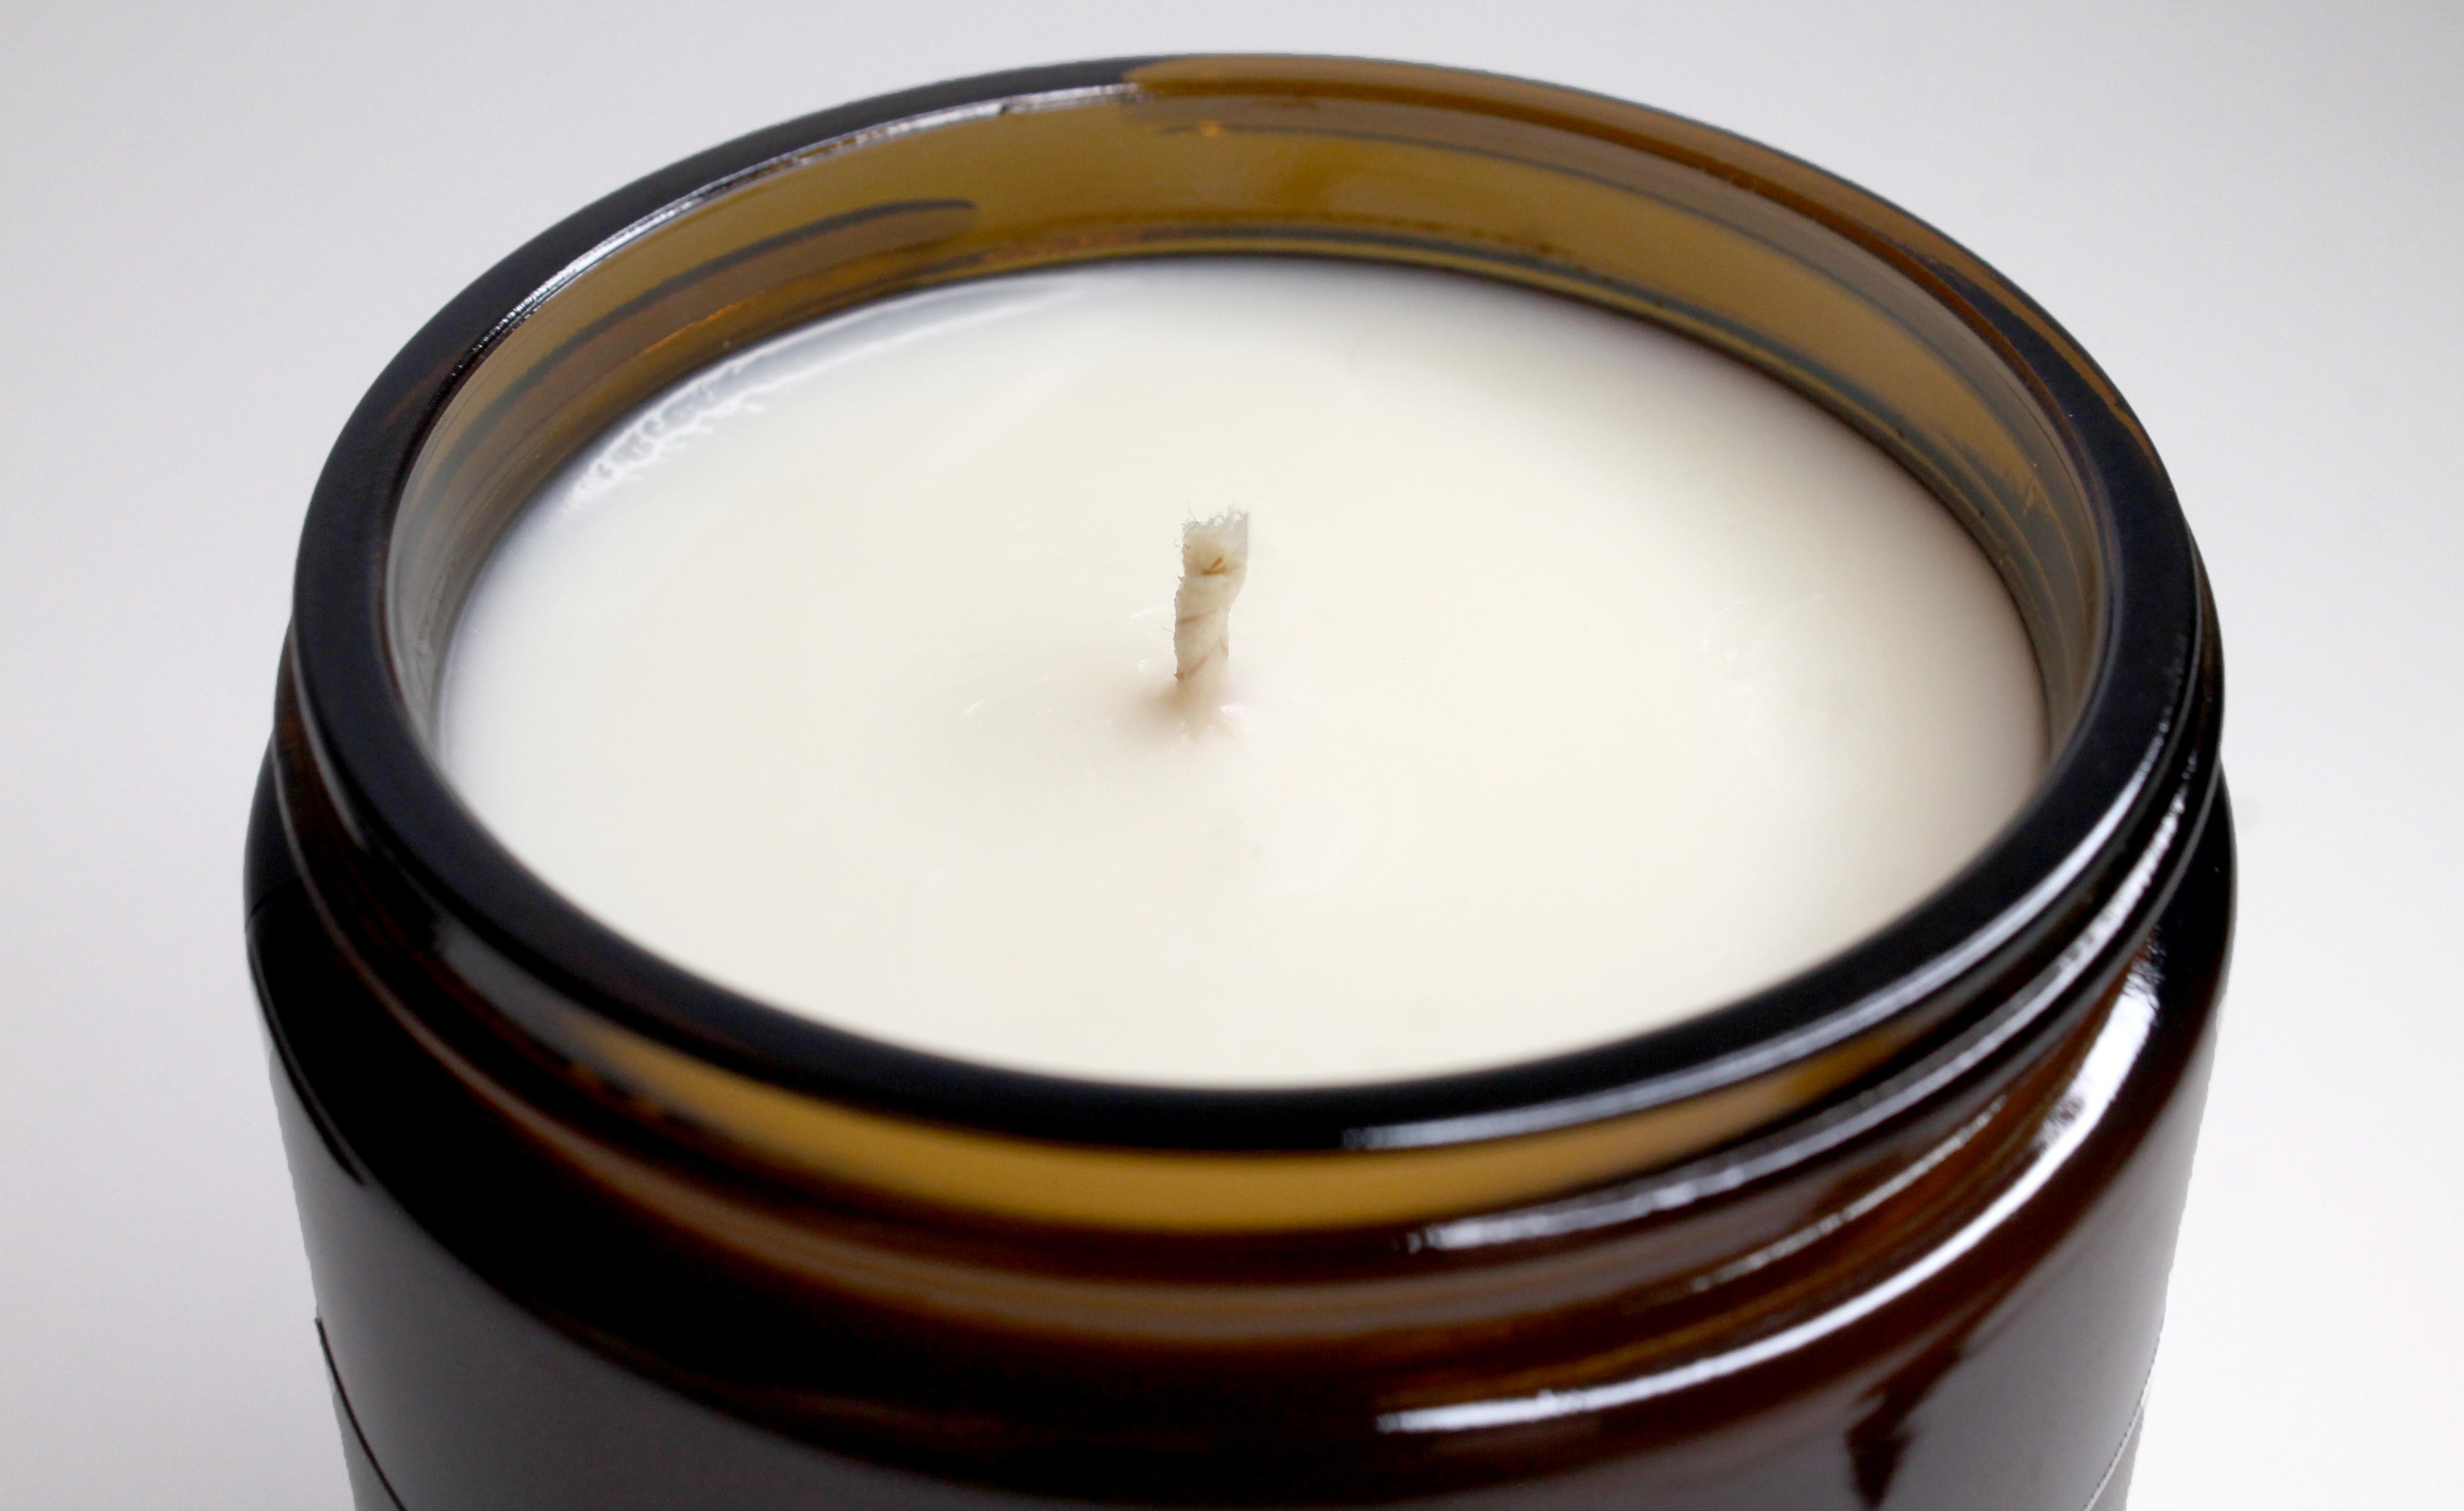 8 ounce 100% soy candle with a single premiem cotton wick